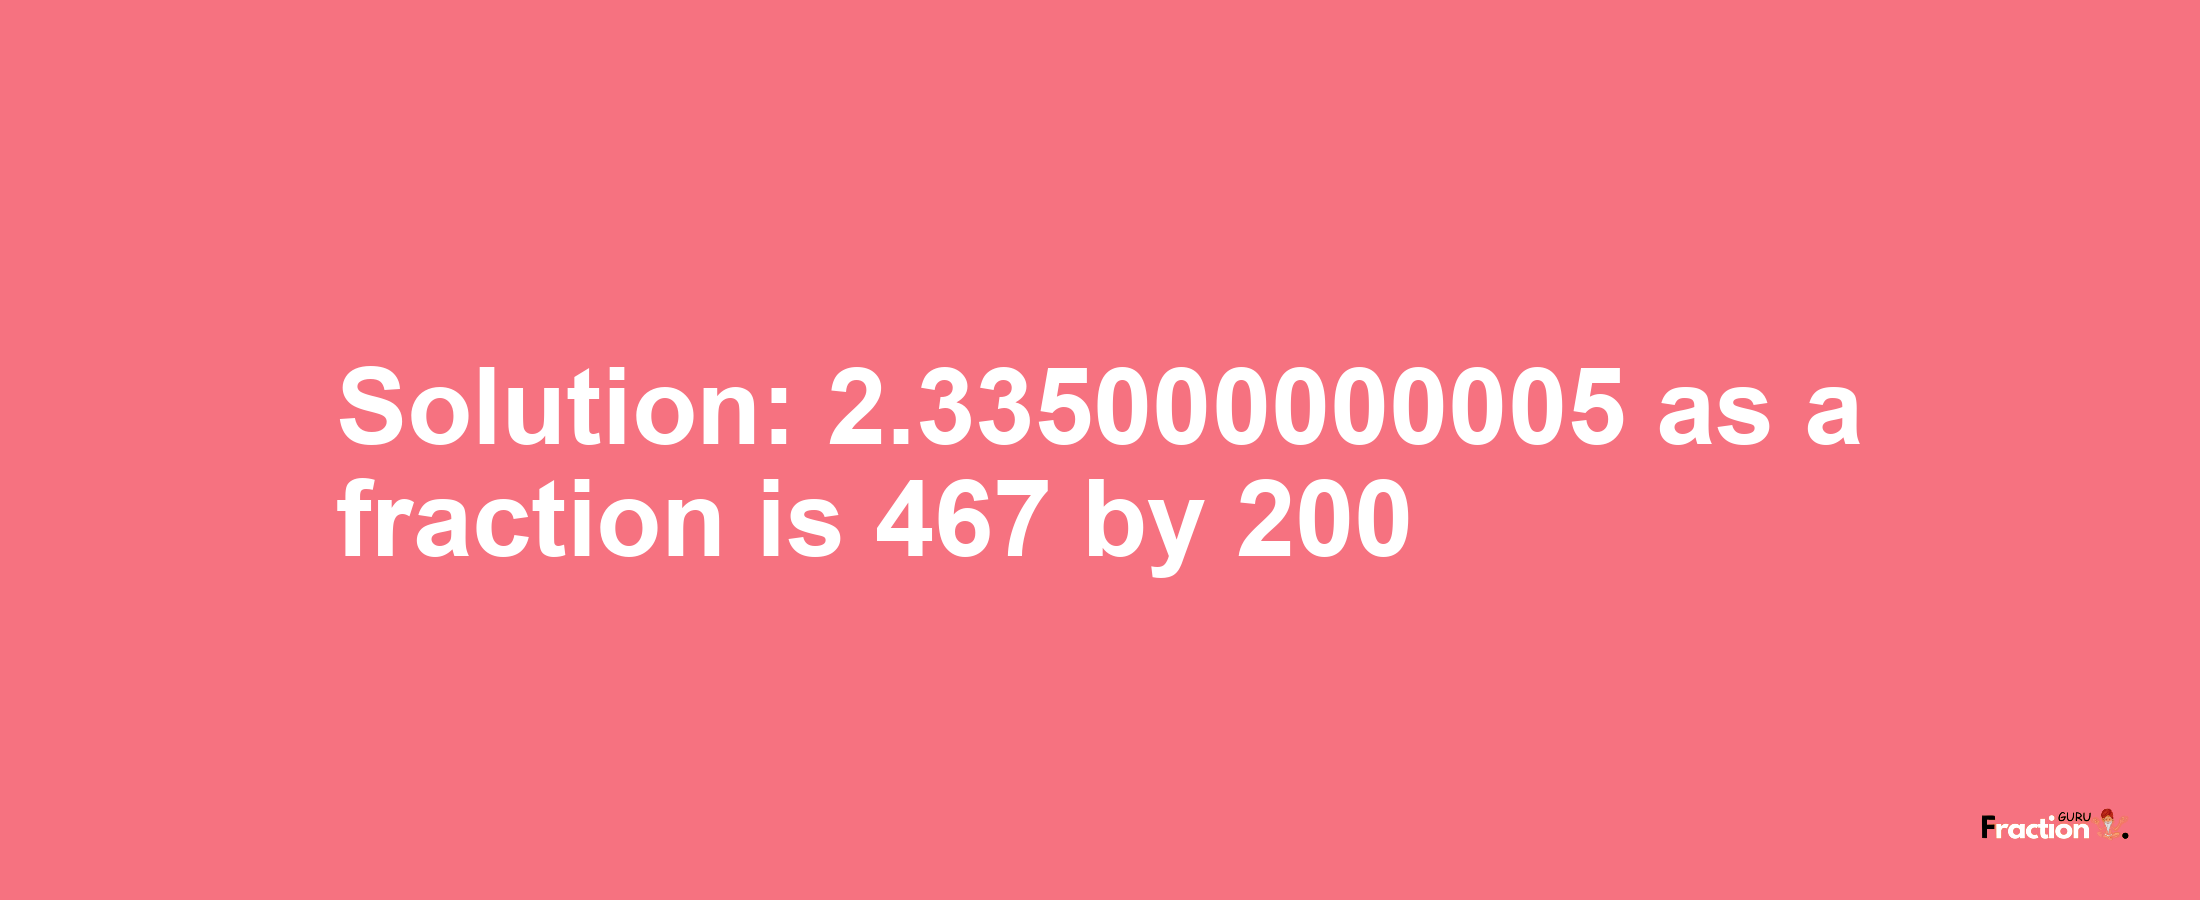 Solution:2.335000000005 as a fraction is 467/200